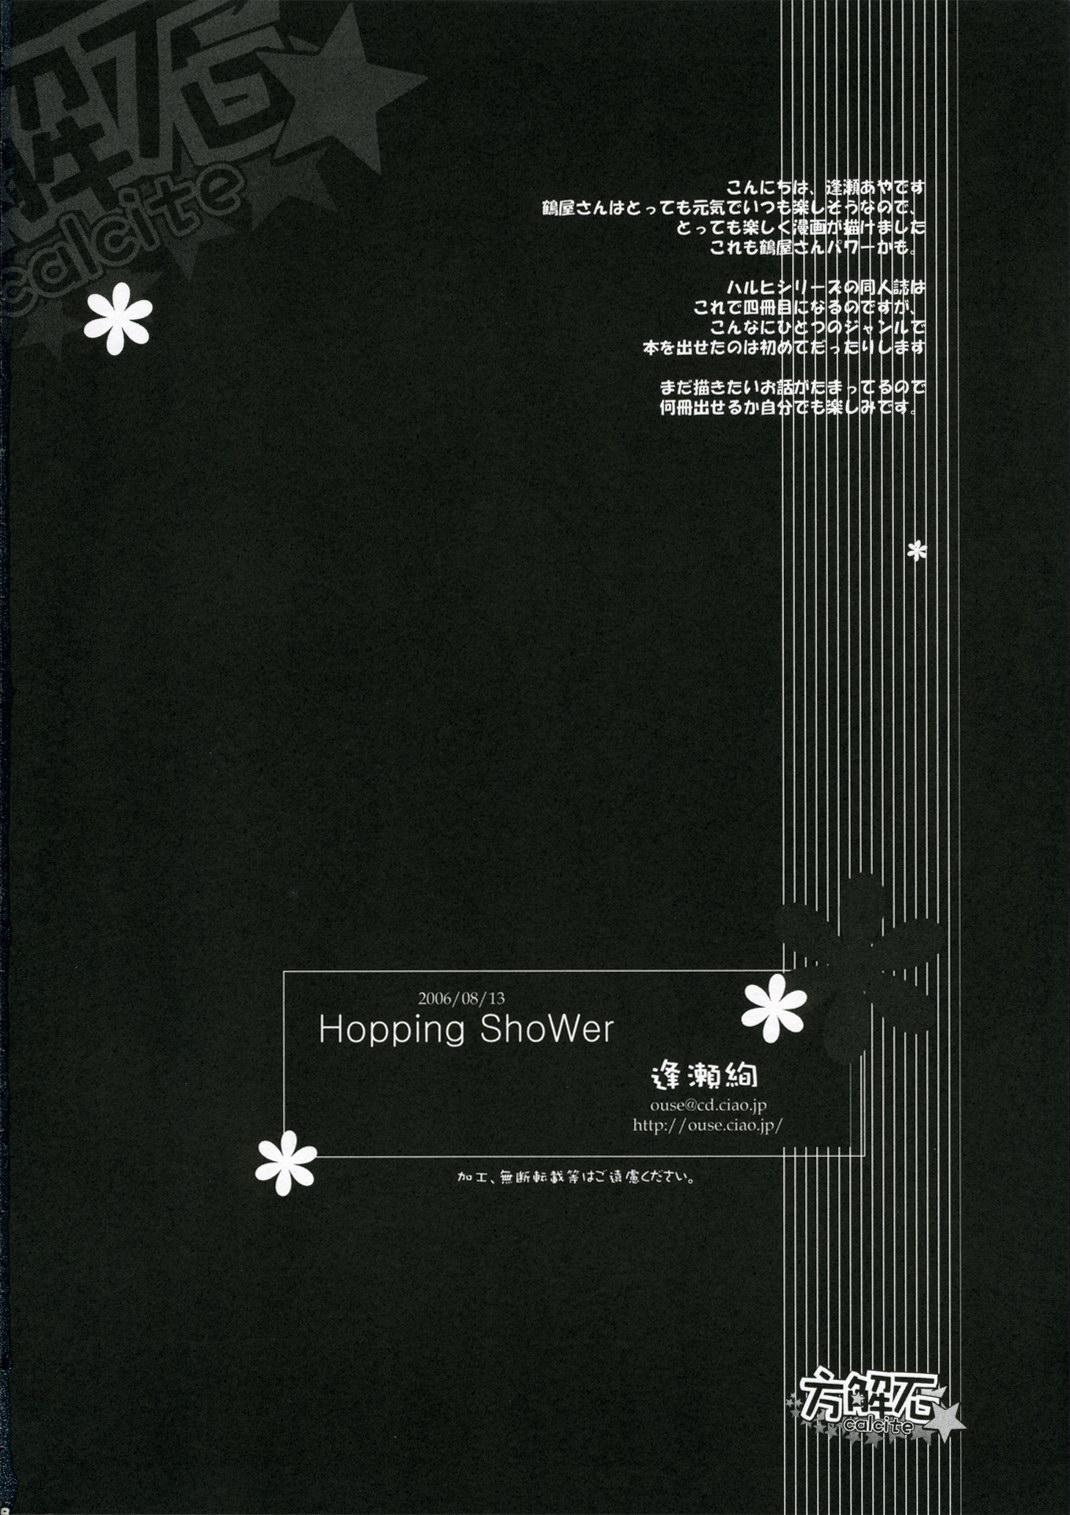 Petite Porn Hopping Shower - The melancholy of haruhi suzumiya Roughsex - Page 17